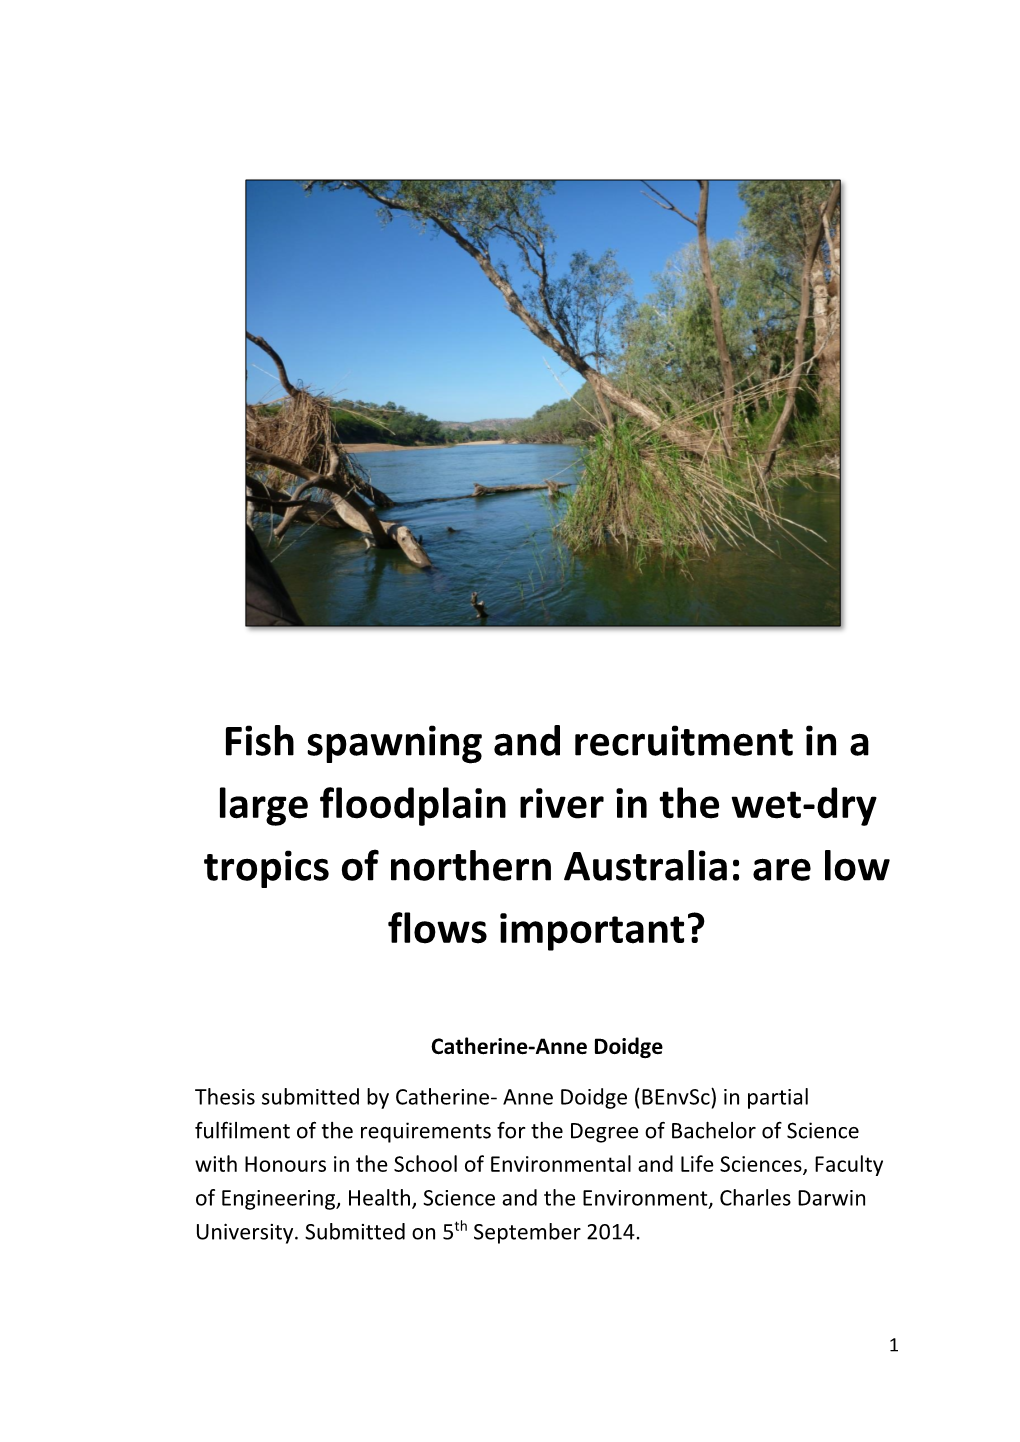 Fish Spawning and Recruitment in a Large Floodplain River in the Wet-Dry Tropics of Northern Australia: Are Low Flows Important?